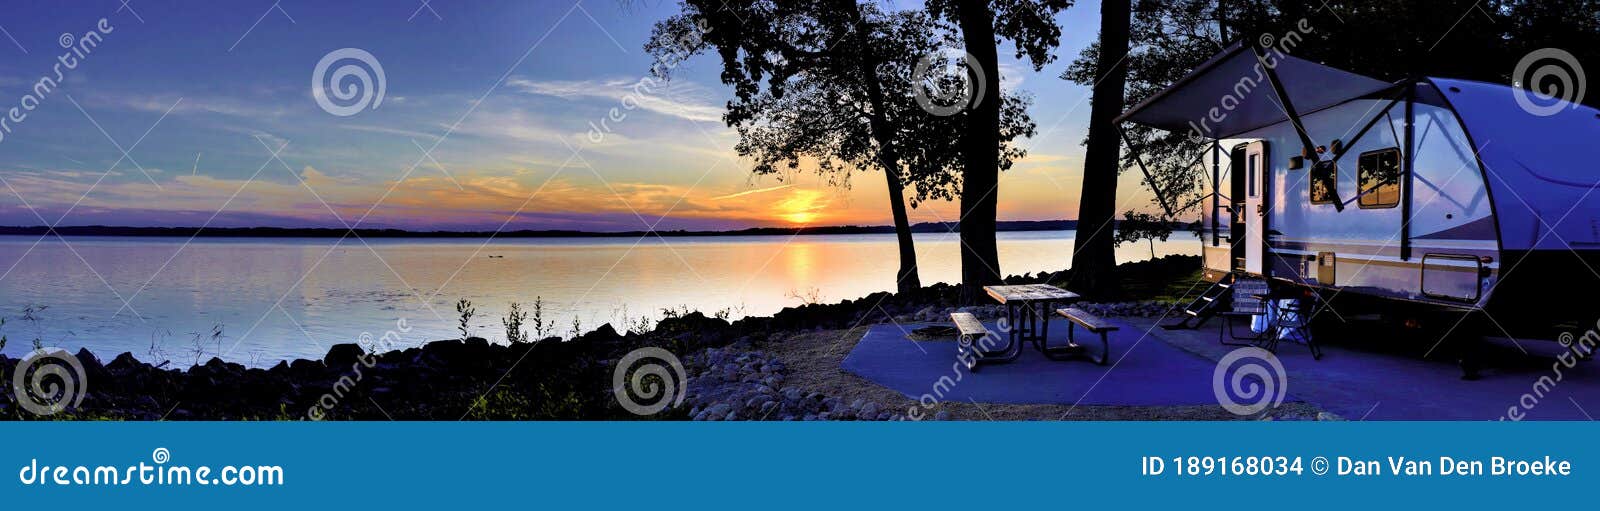 travel trailer camping by the mississippi river at sunset in illinois